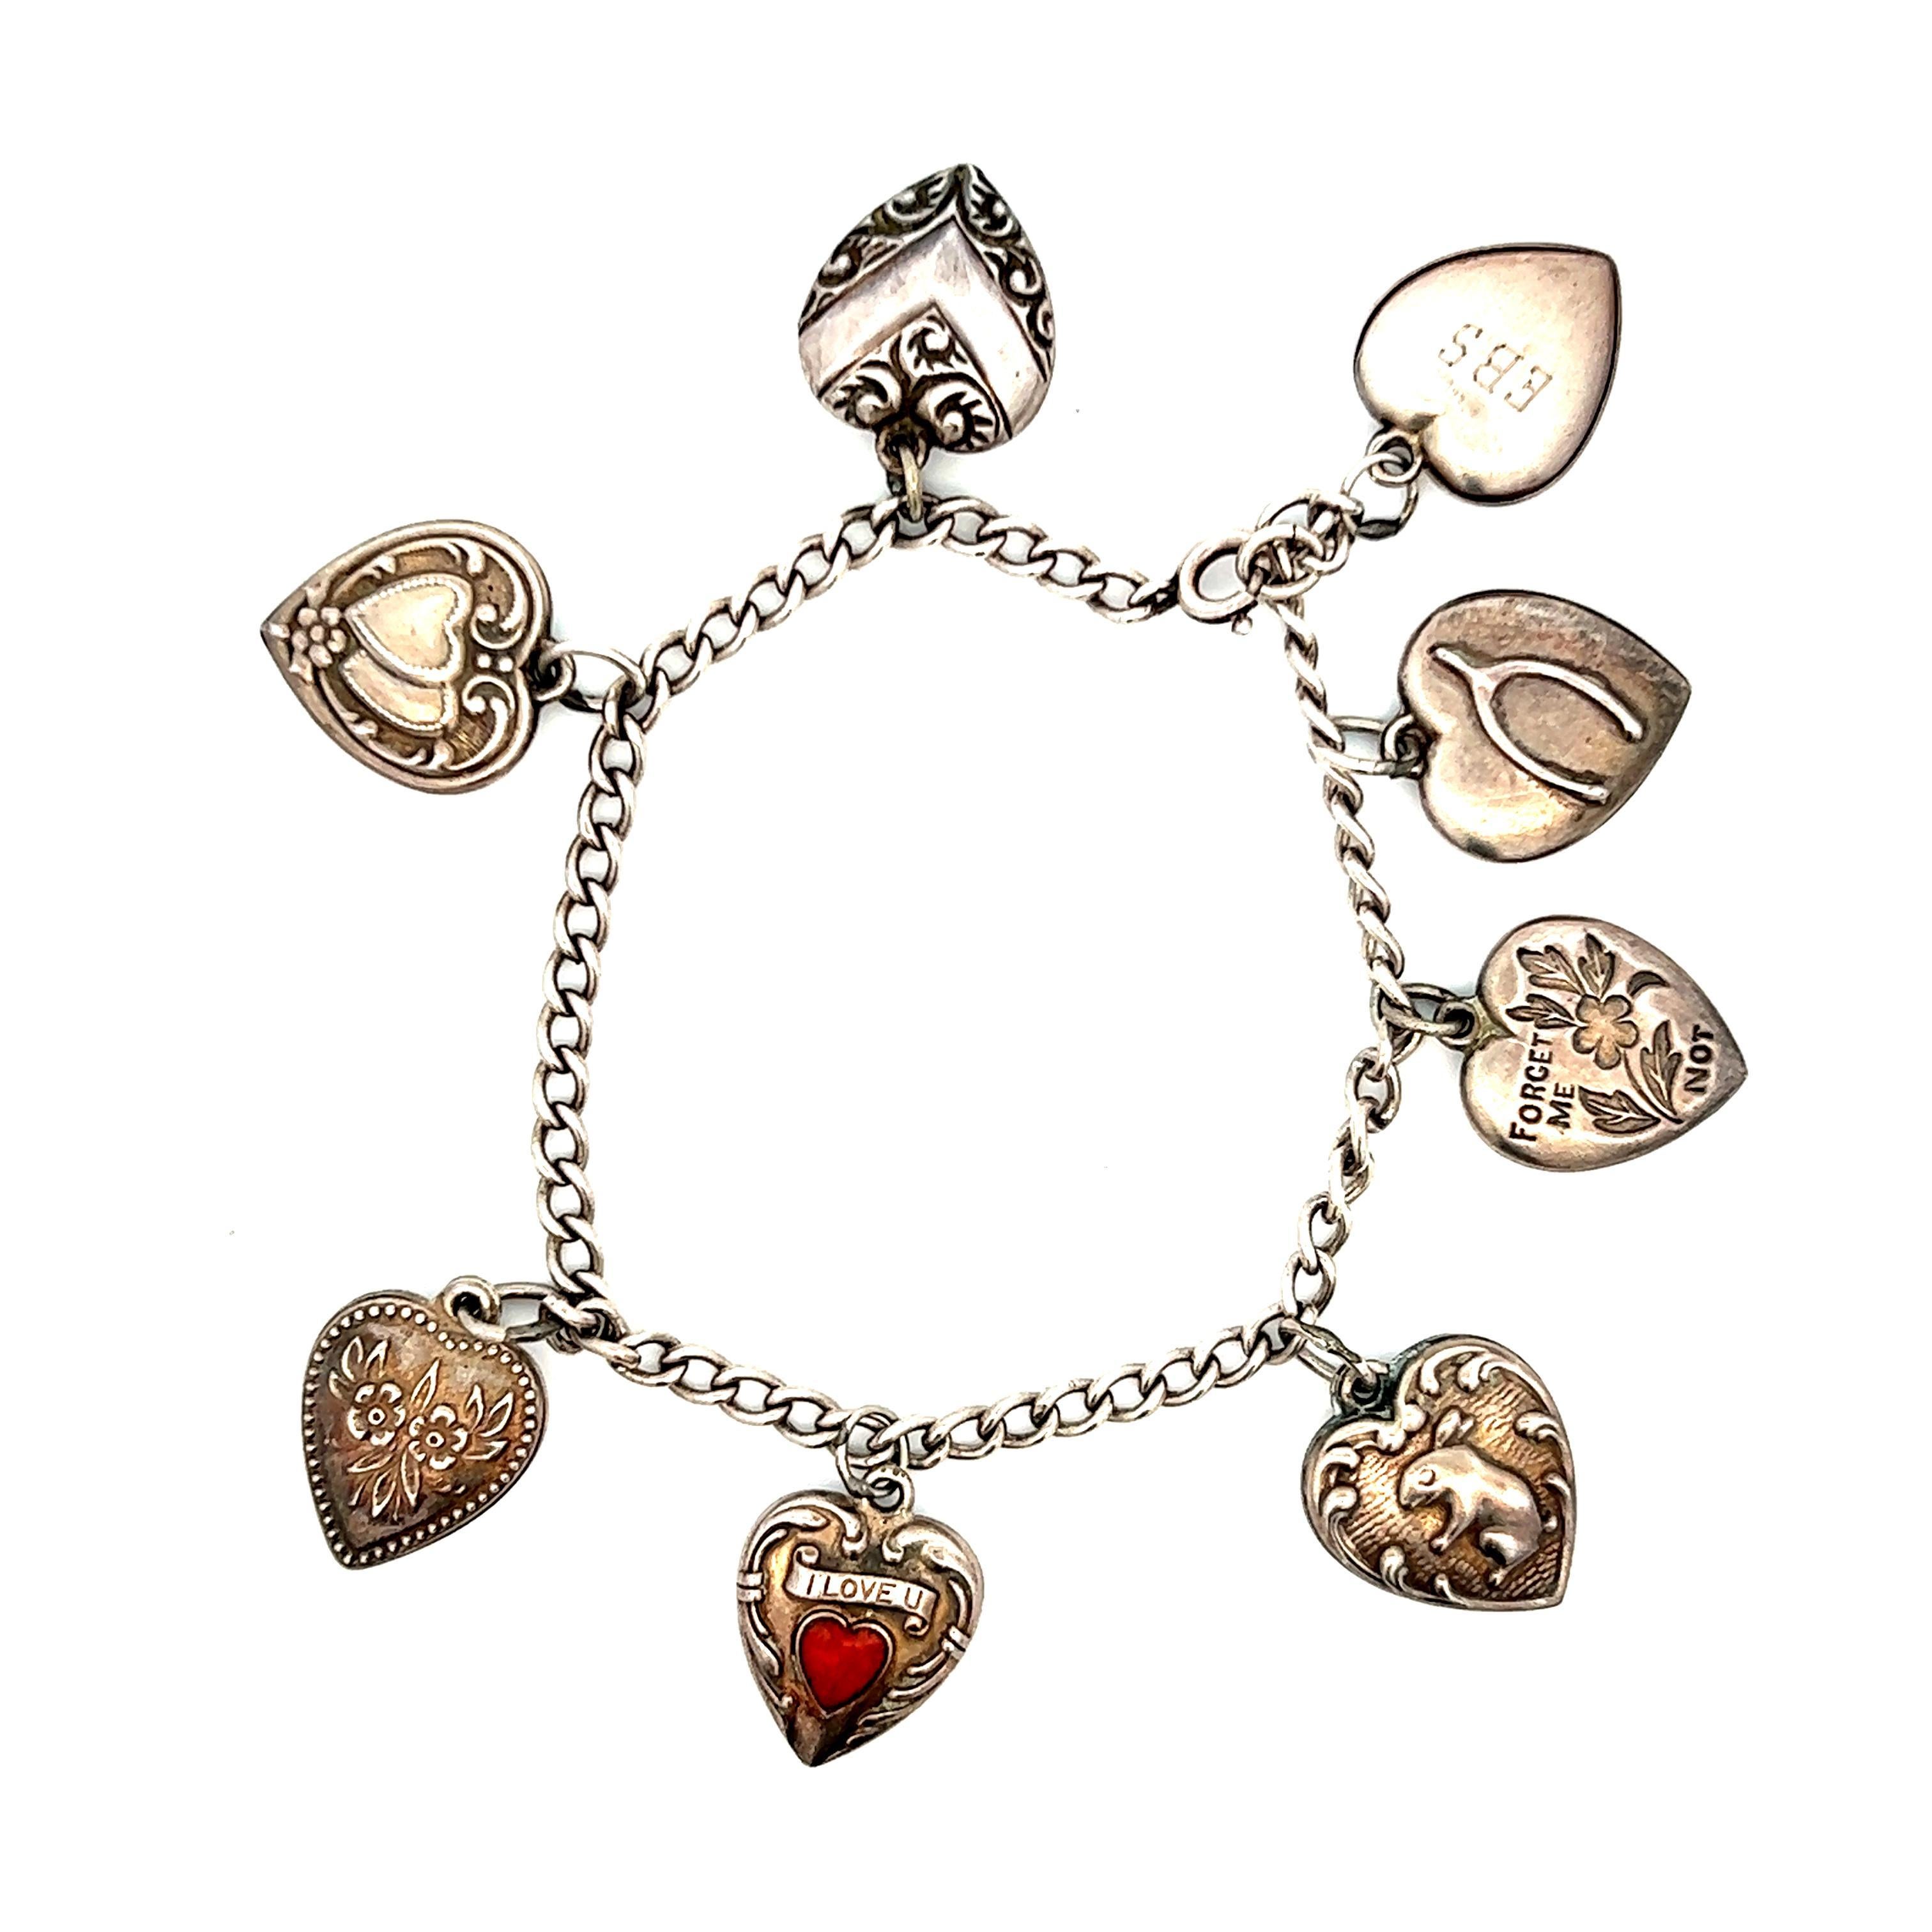 This is an exquisite sterling silver charm bracelet, a timeless piece crafted from high quality sterling silver, coming from the 1940s Art Deco period. This stunning bracelet features an array of charming vintage inspired charms, each designed to